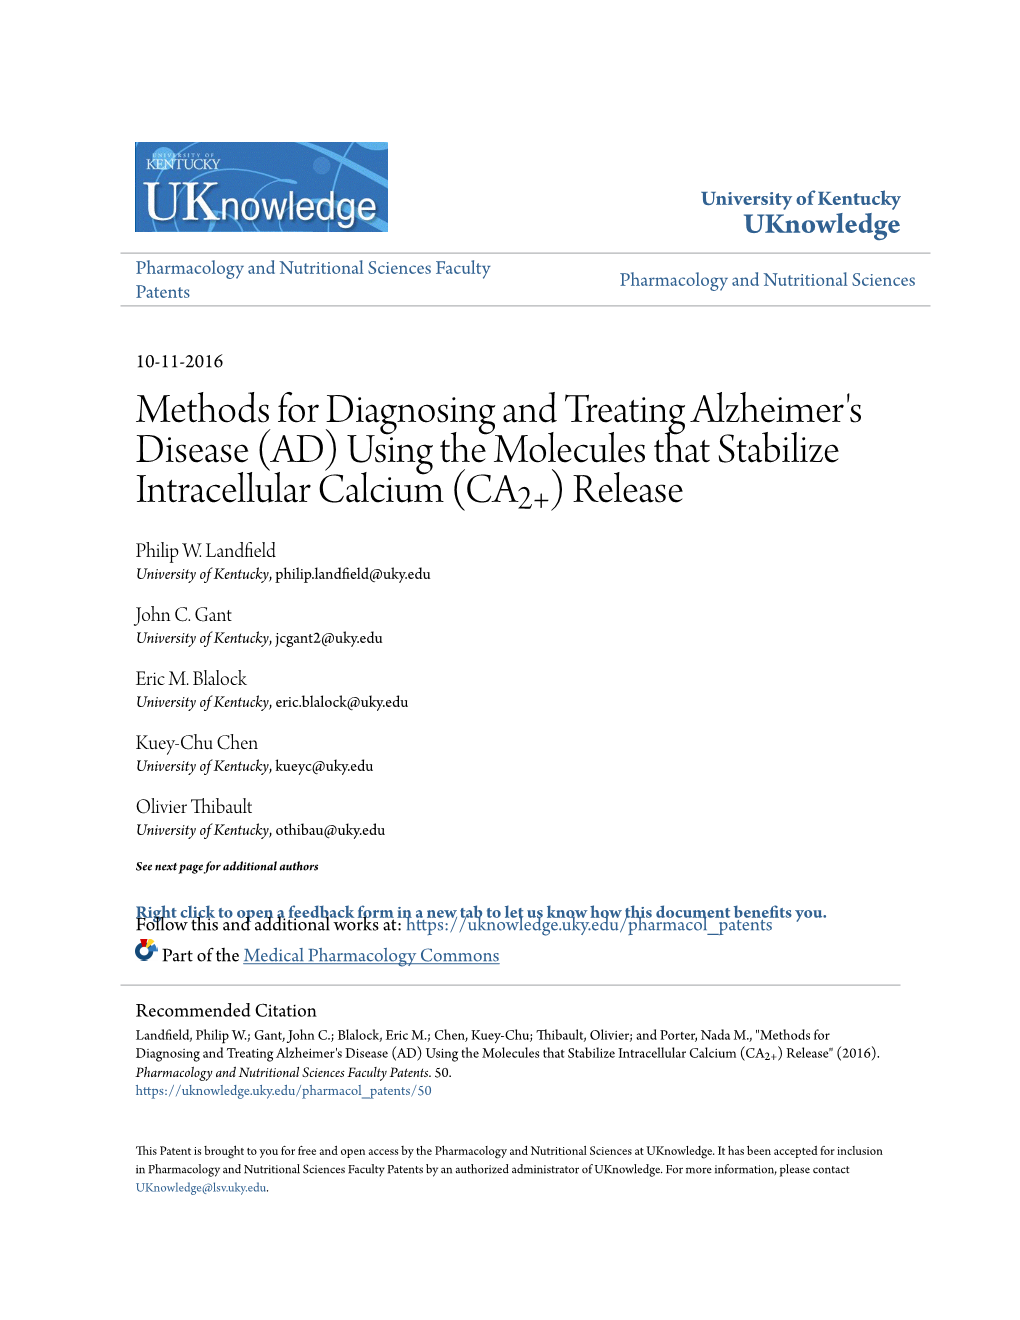 Methods for Diagnosing and Treating Alzheimer's Disease (AD) Using the Molecules That Stabilize Intracellular Calcium (CA2+) Release